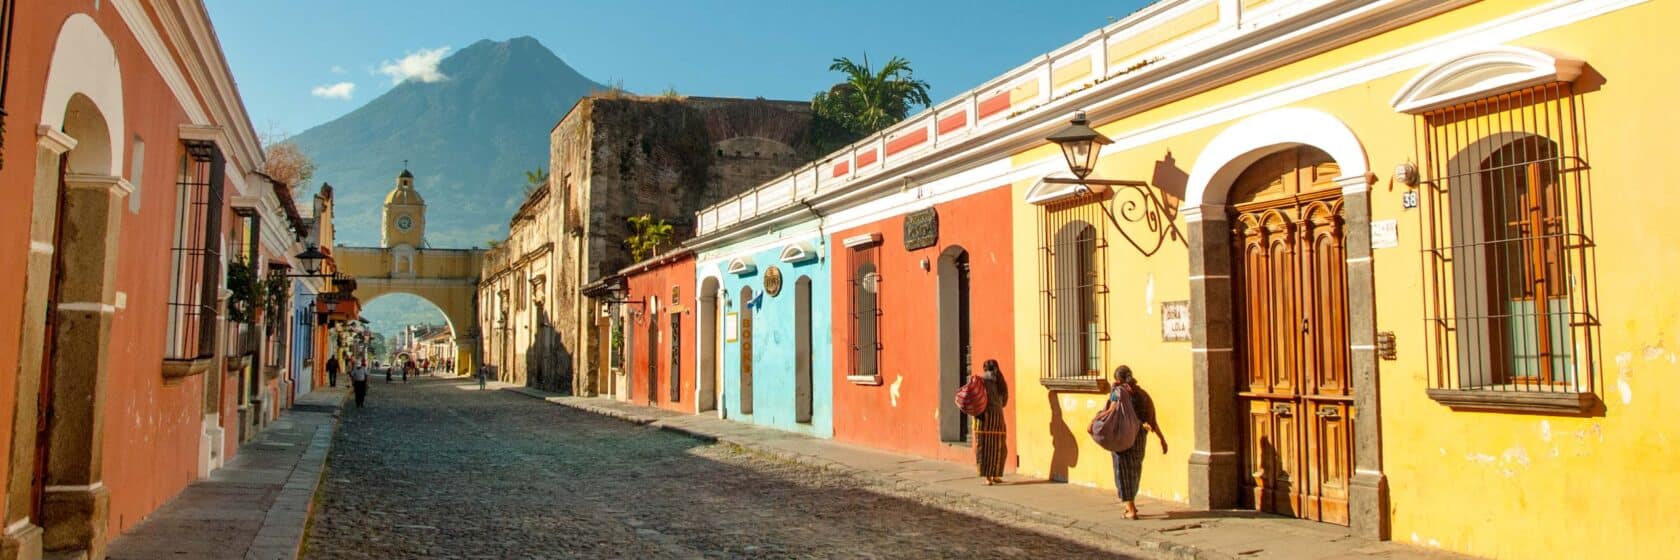 A street with colorful buildings in Guatemala.